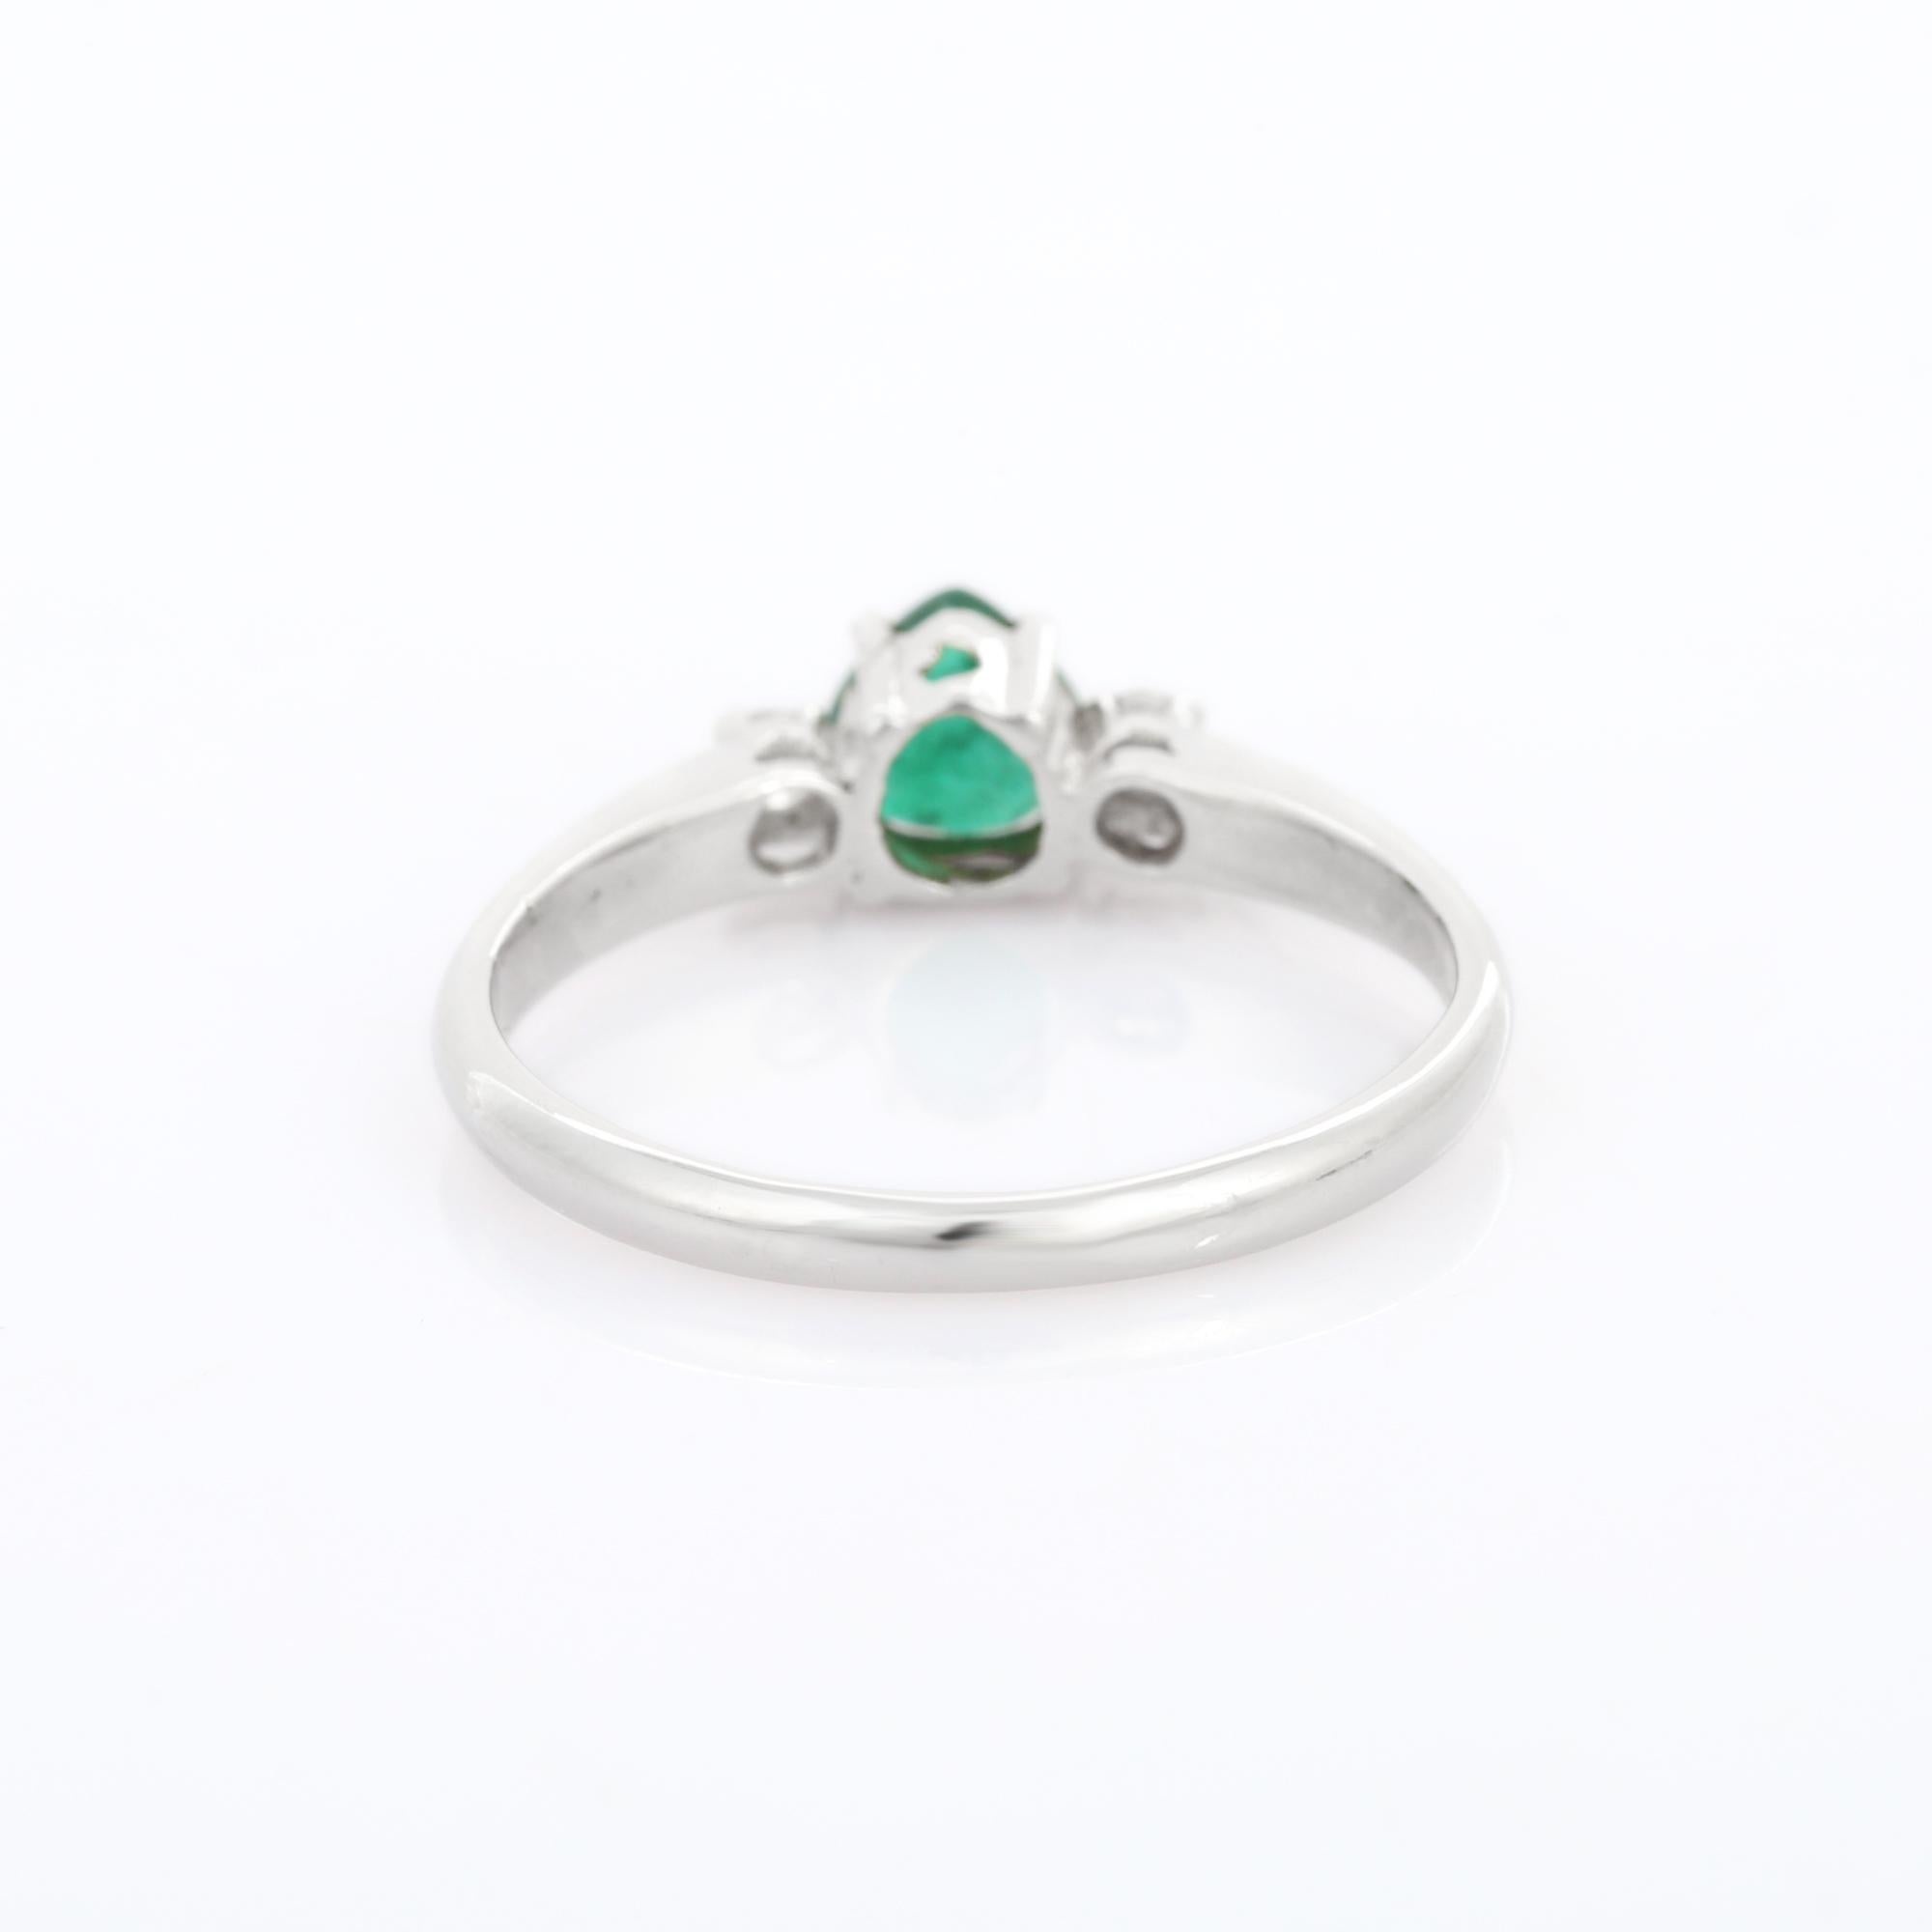 For Sale:  18k Solid White Gold Emerald Ring with Diamonds 5